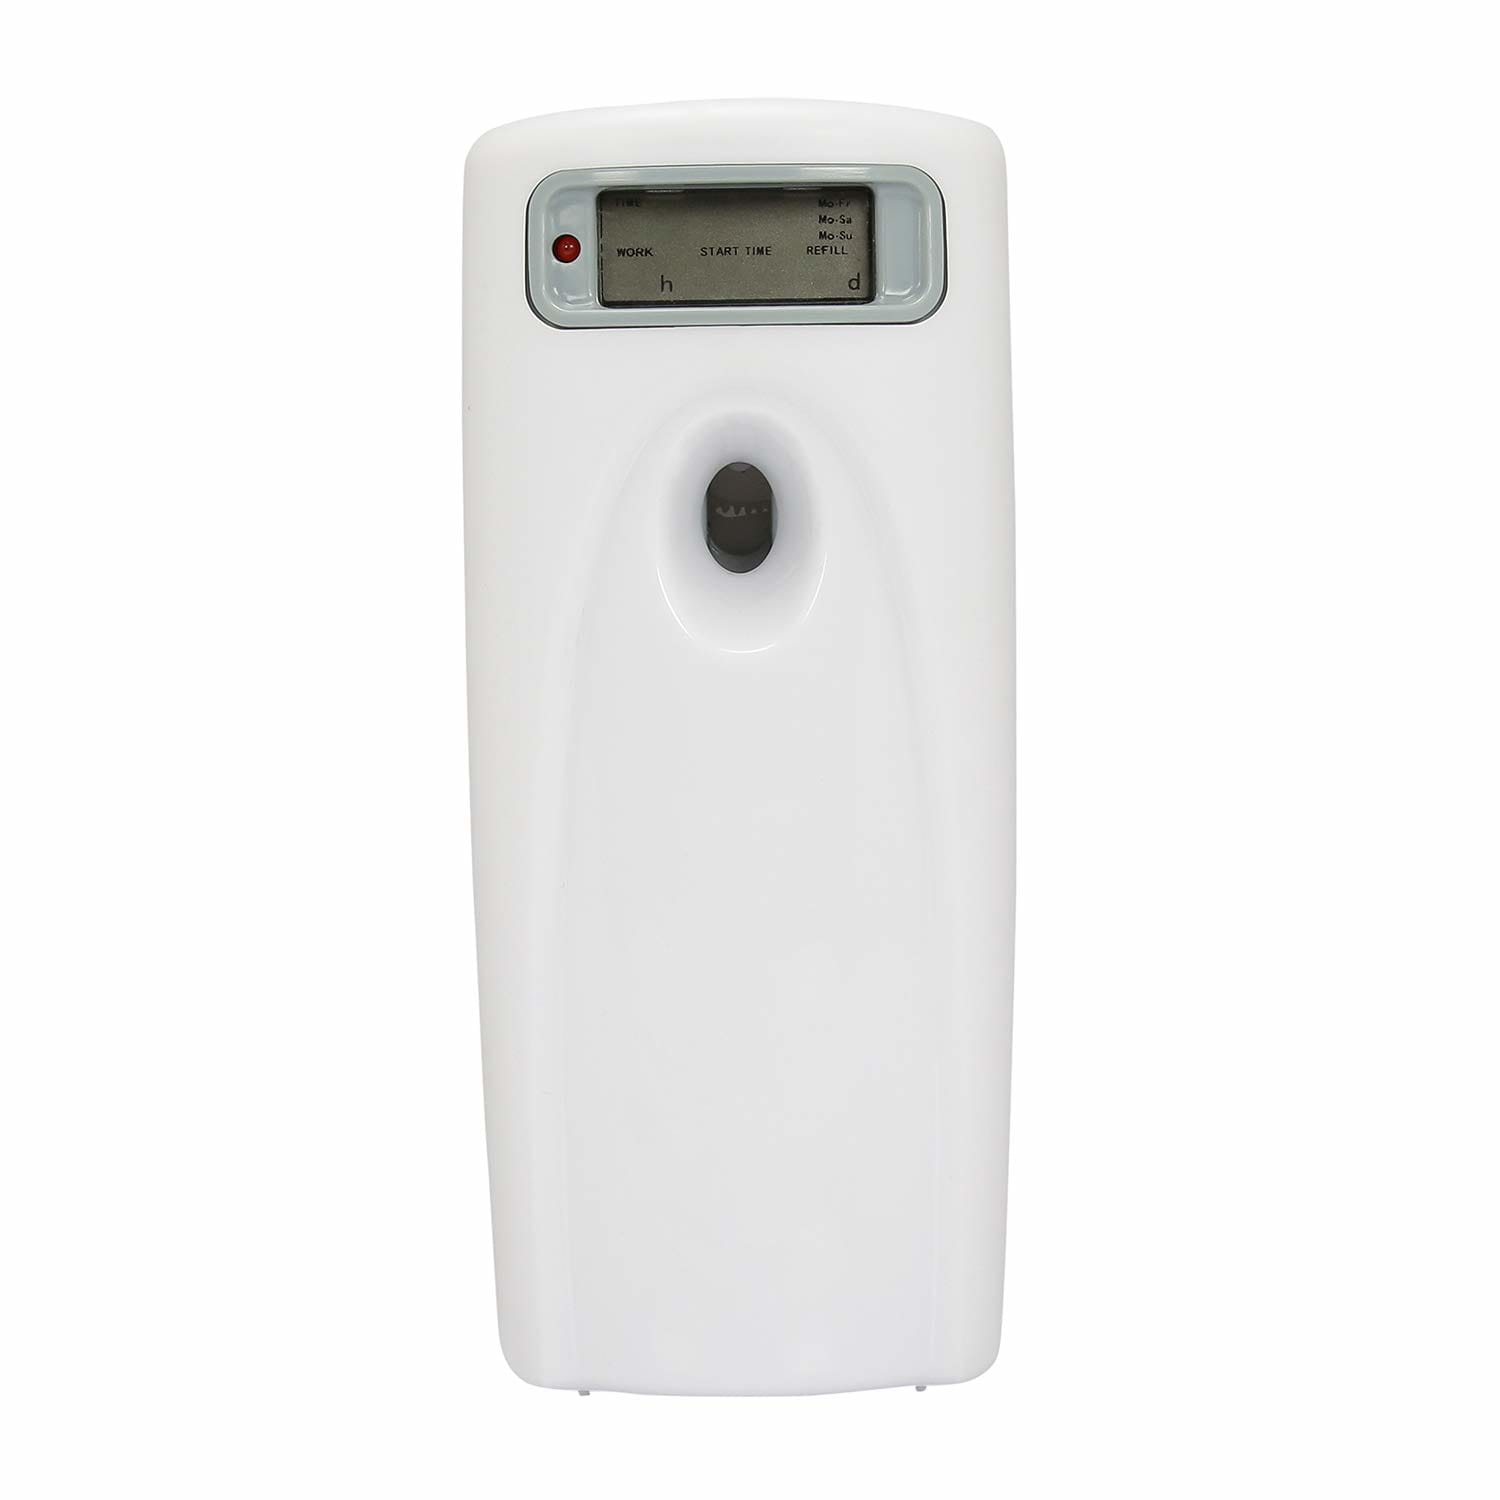 Cotton Mist LCD Display Automatic Spray Air Freshener